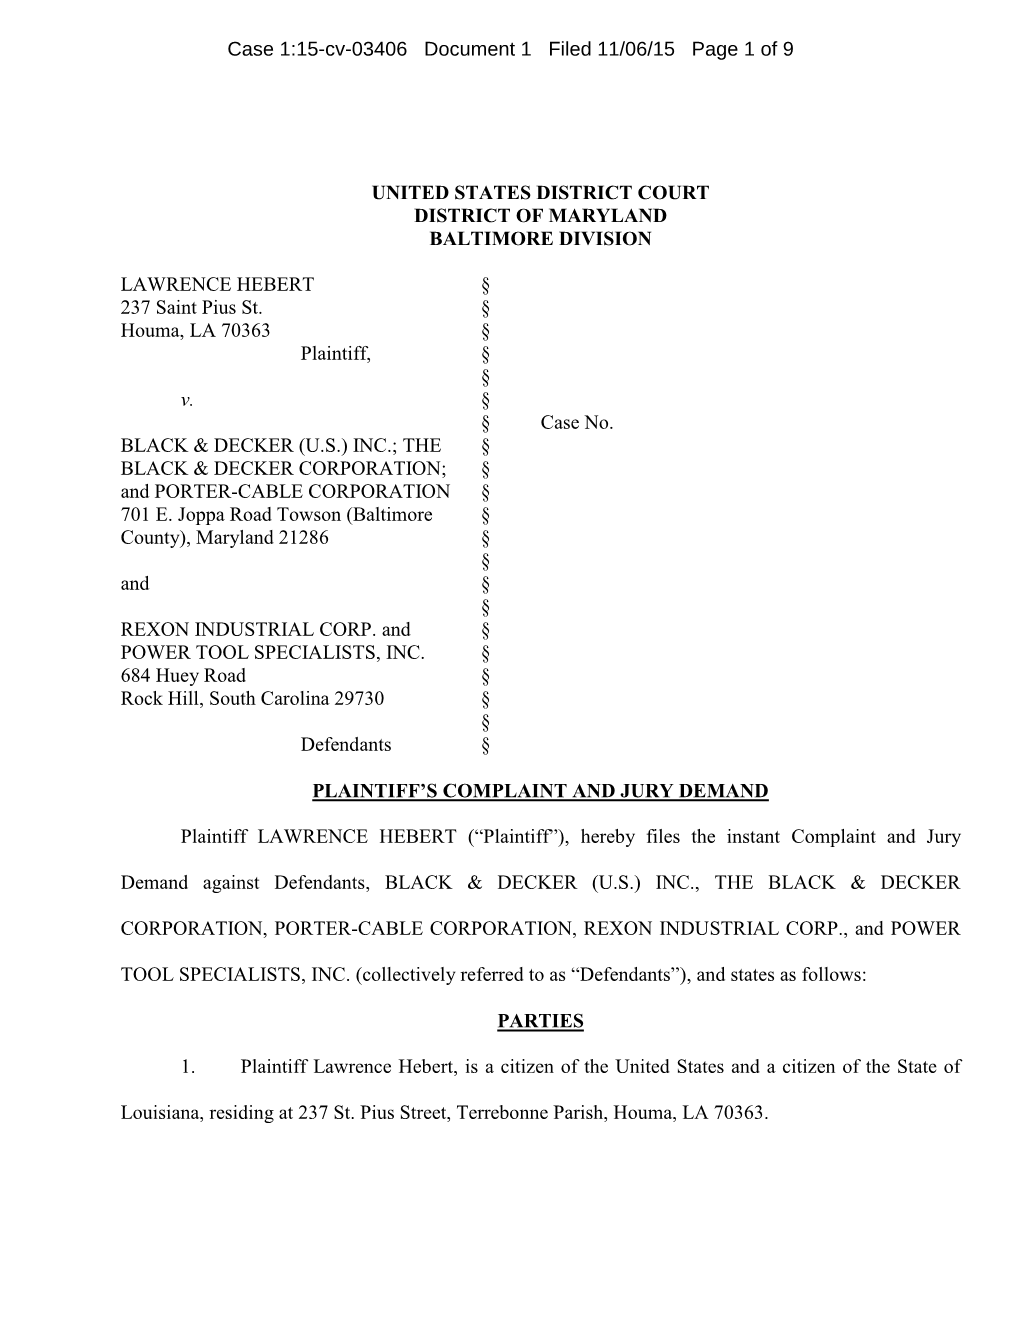 Case 1:15-Cv-03406 Document 1 Filed 11/06/15 Page 1 of 9